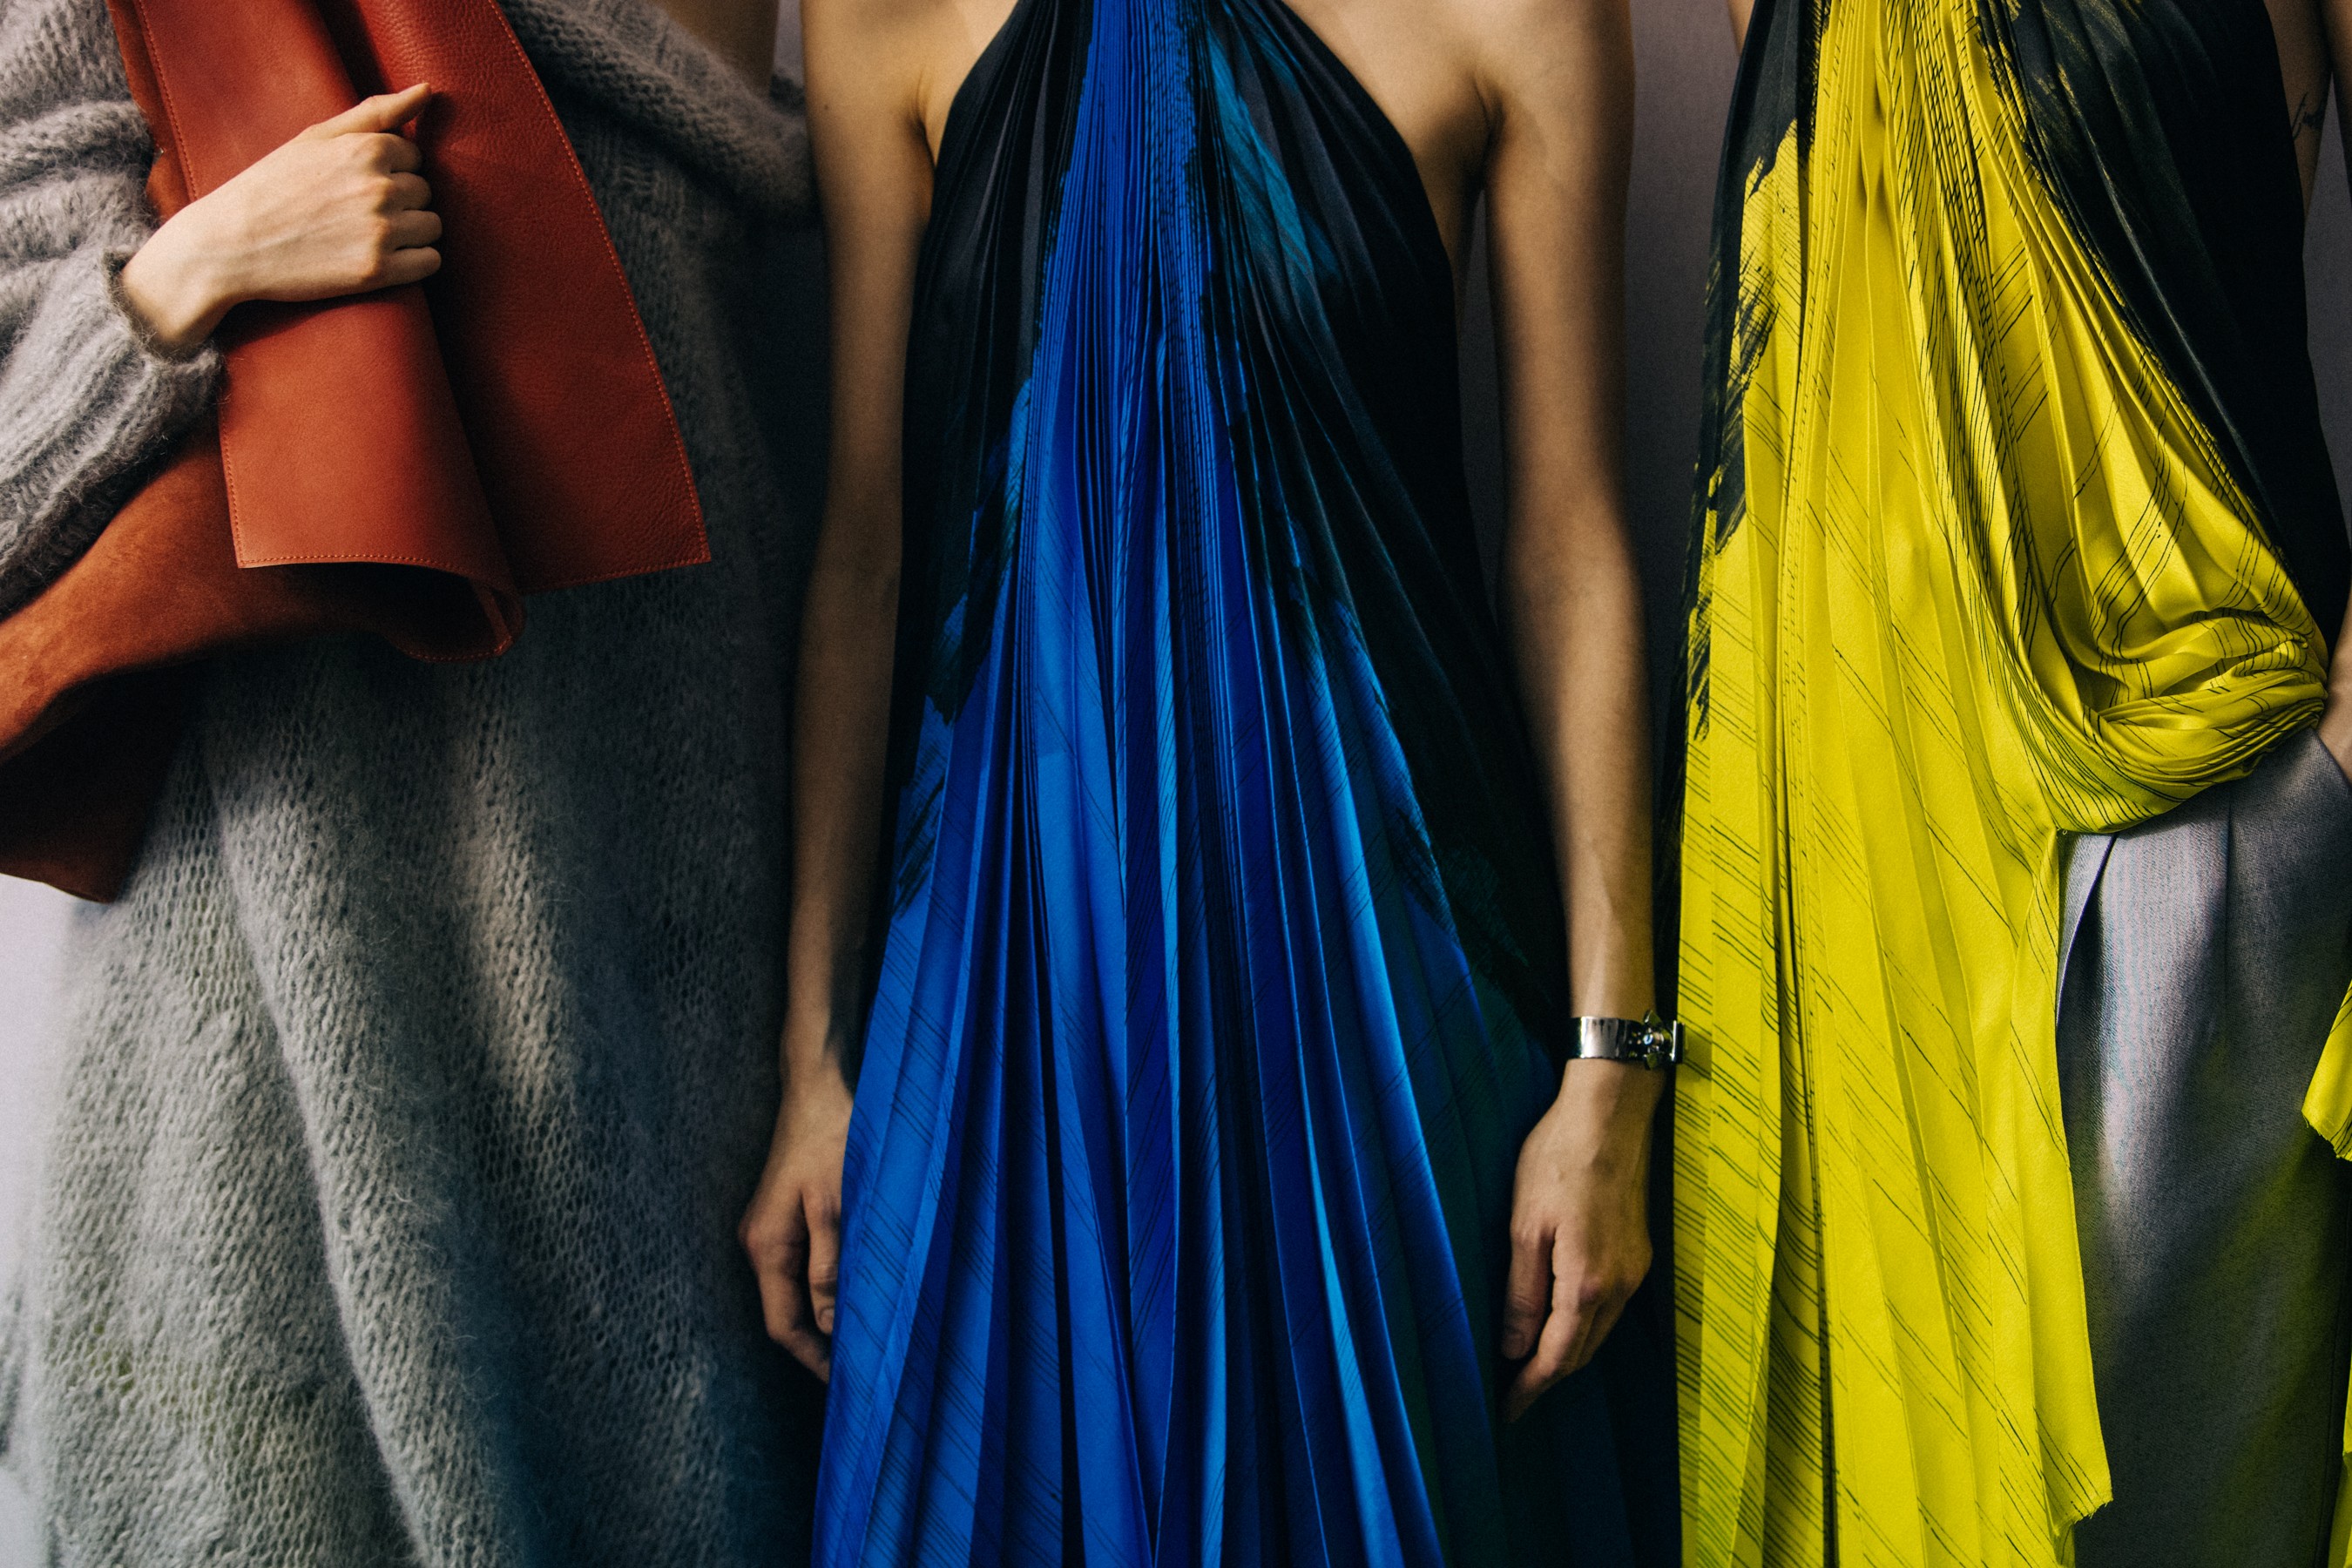 Poiret’s draped styles were revolutionary in the 1910s and have been updated by Yiqing Yin for the autumn-winter 2018 collection. Photo: Adam Katz Sinding